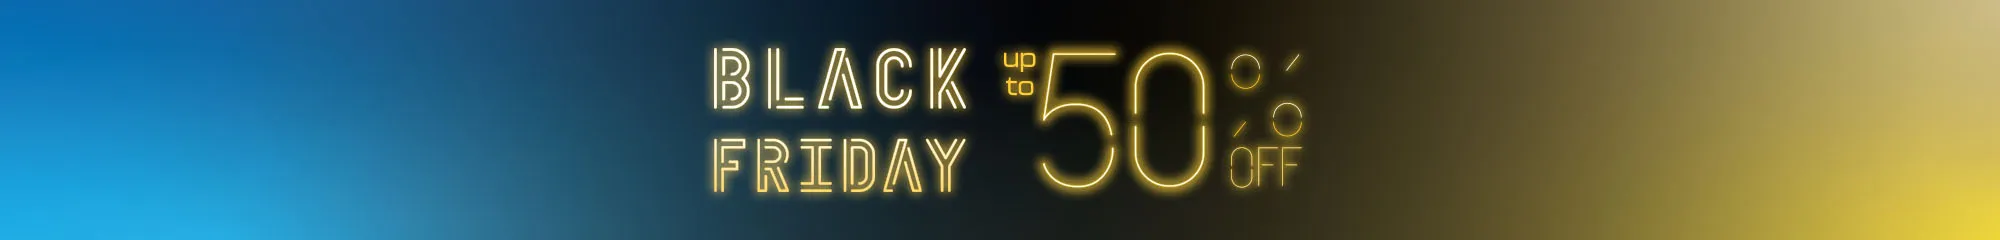 Black Friday Deals Up To 50% Off